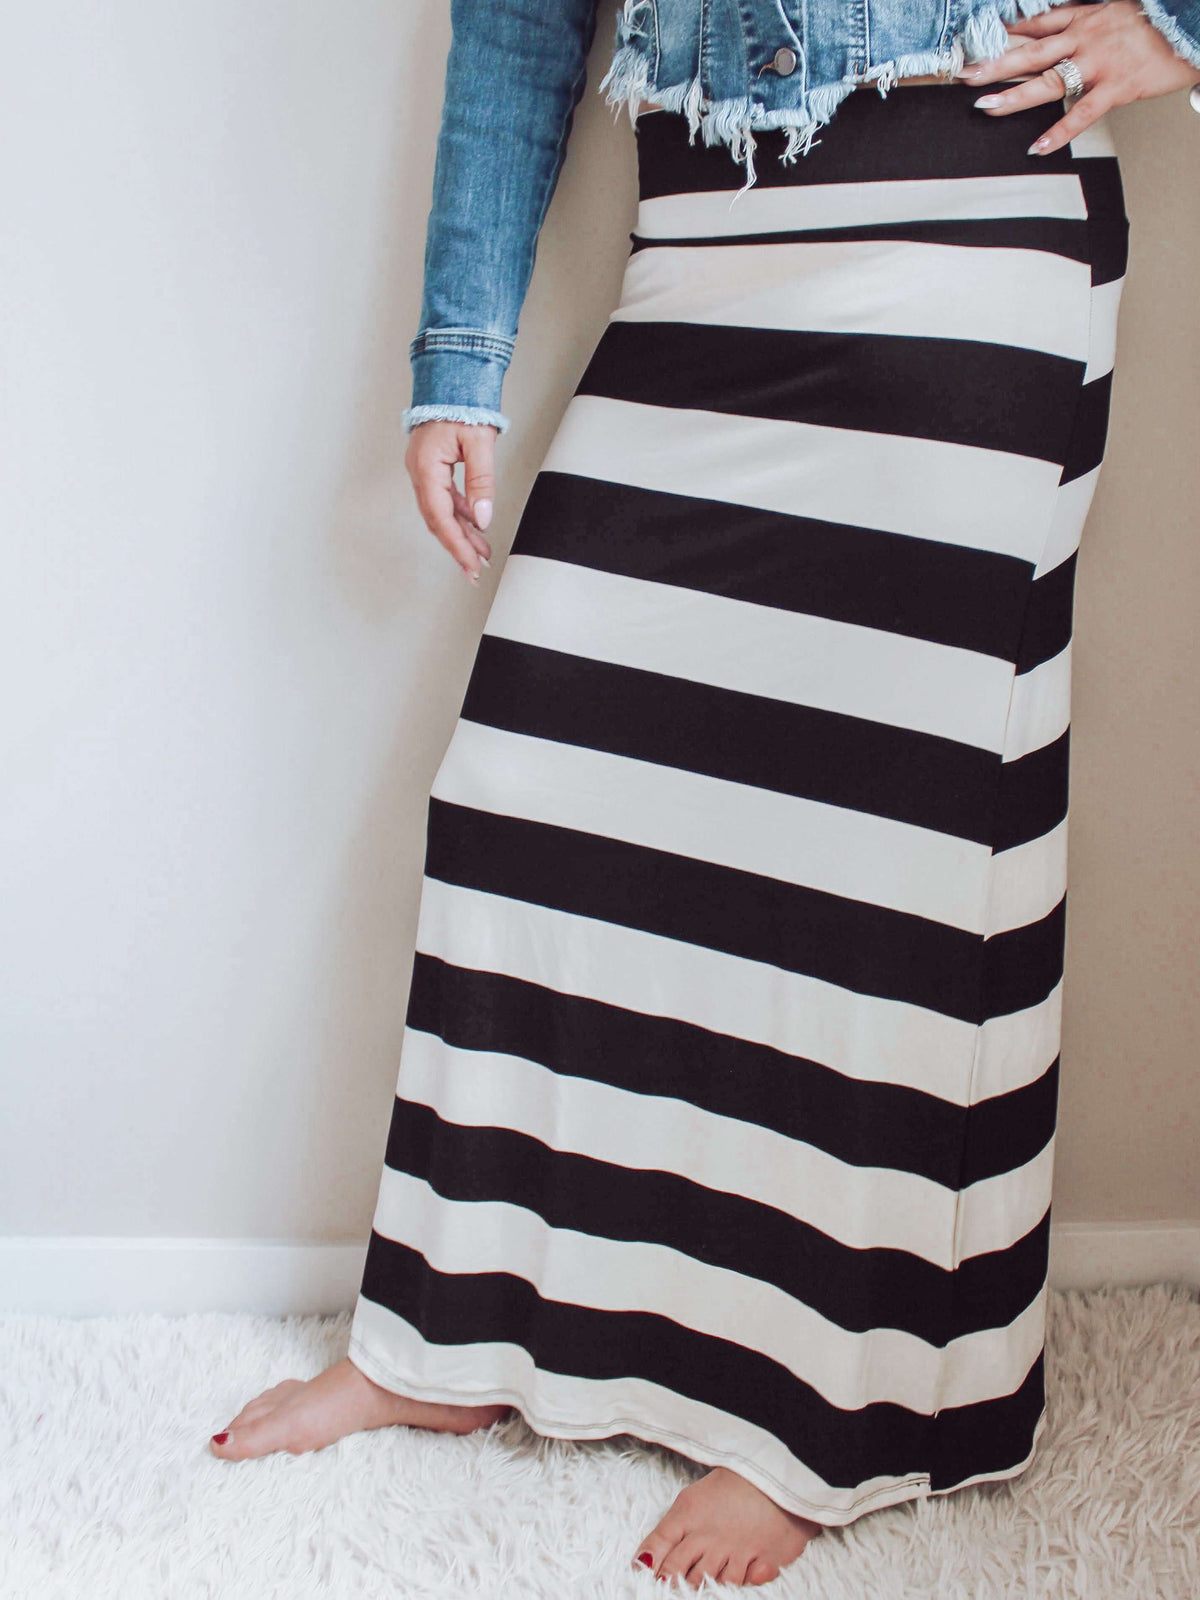 Online Boutique Shop For Womens Clothing Featuring Amazing Skirts